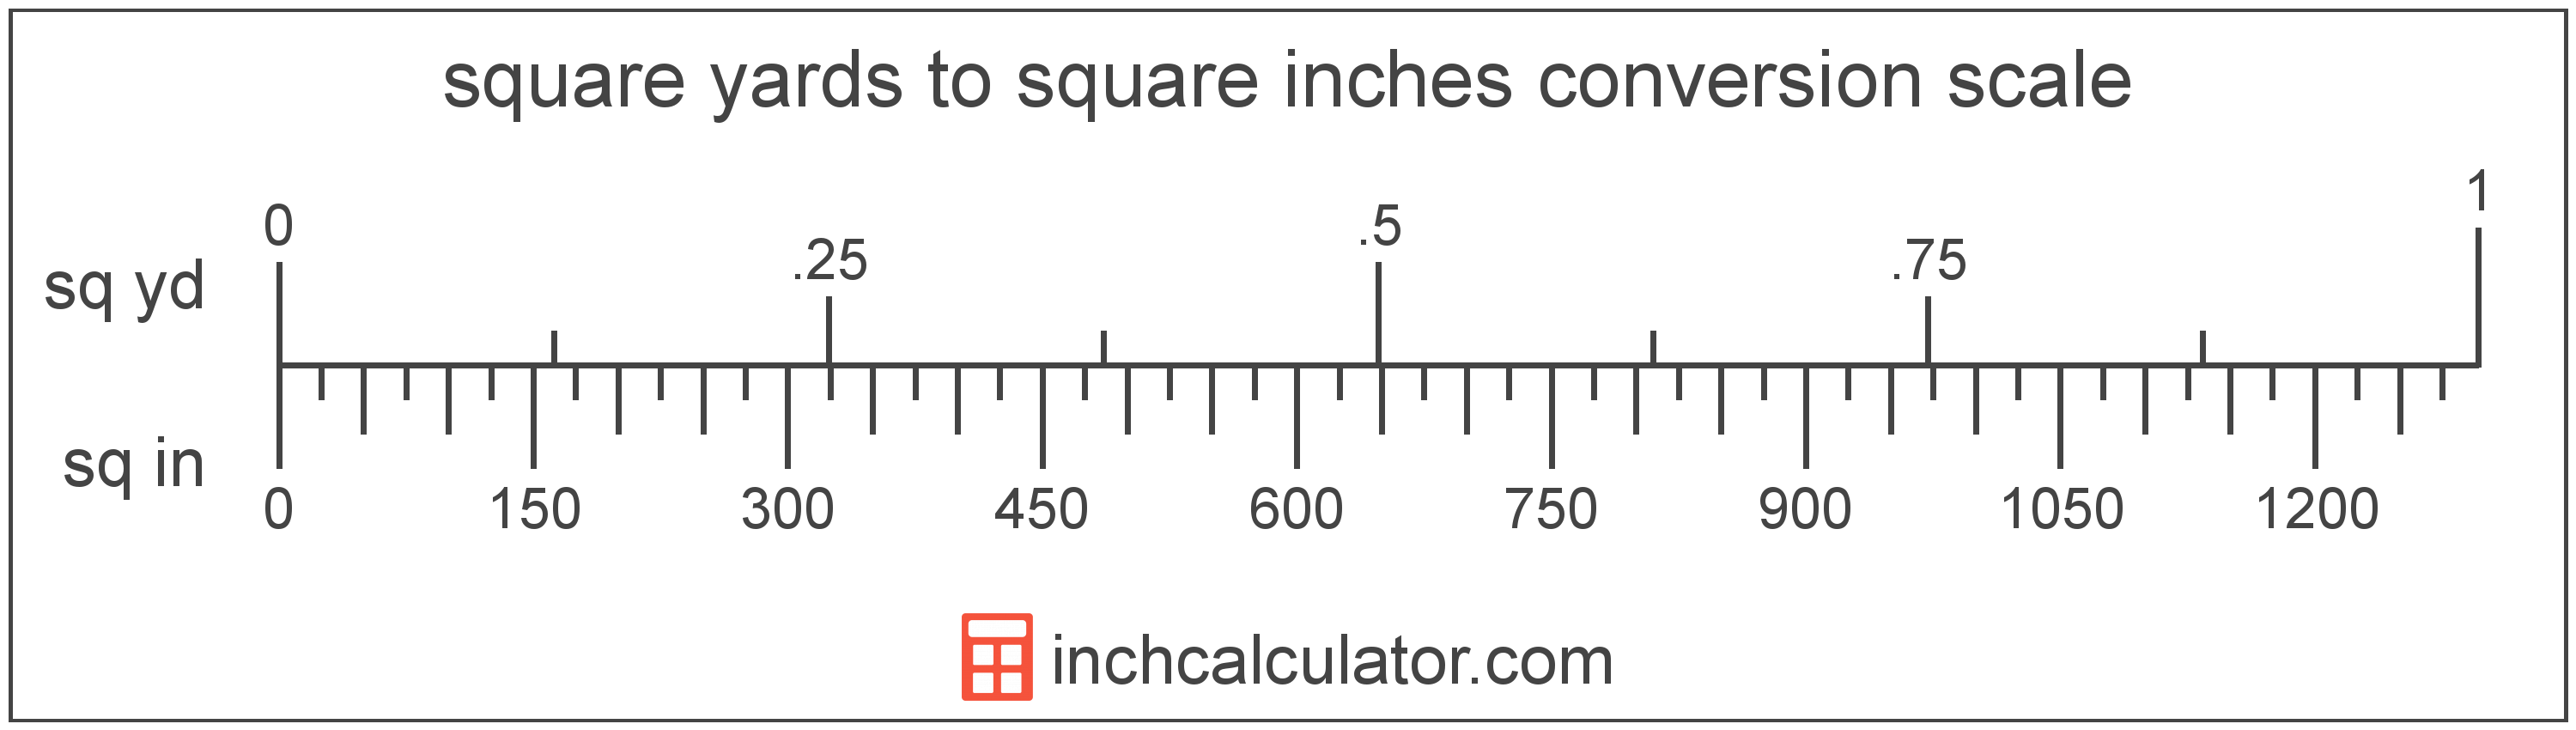 conversion scale showing square yards and equivalent square inches area values